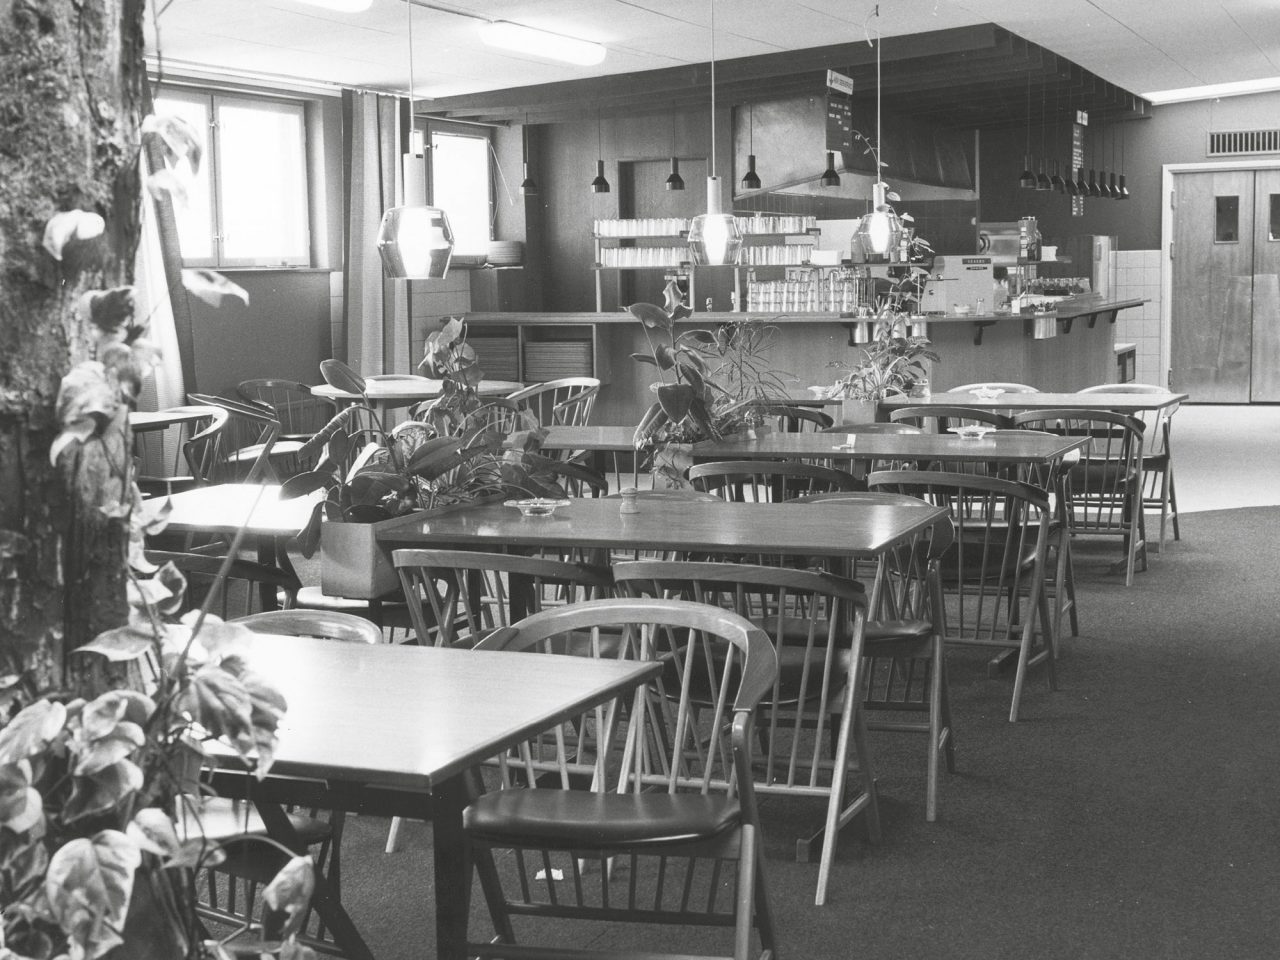 Empty restaurant with self-service area and 1960s wood furnishings.